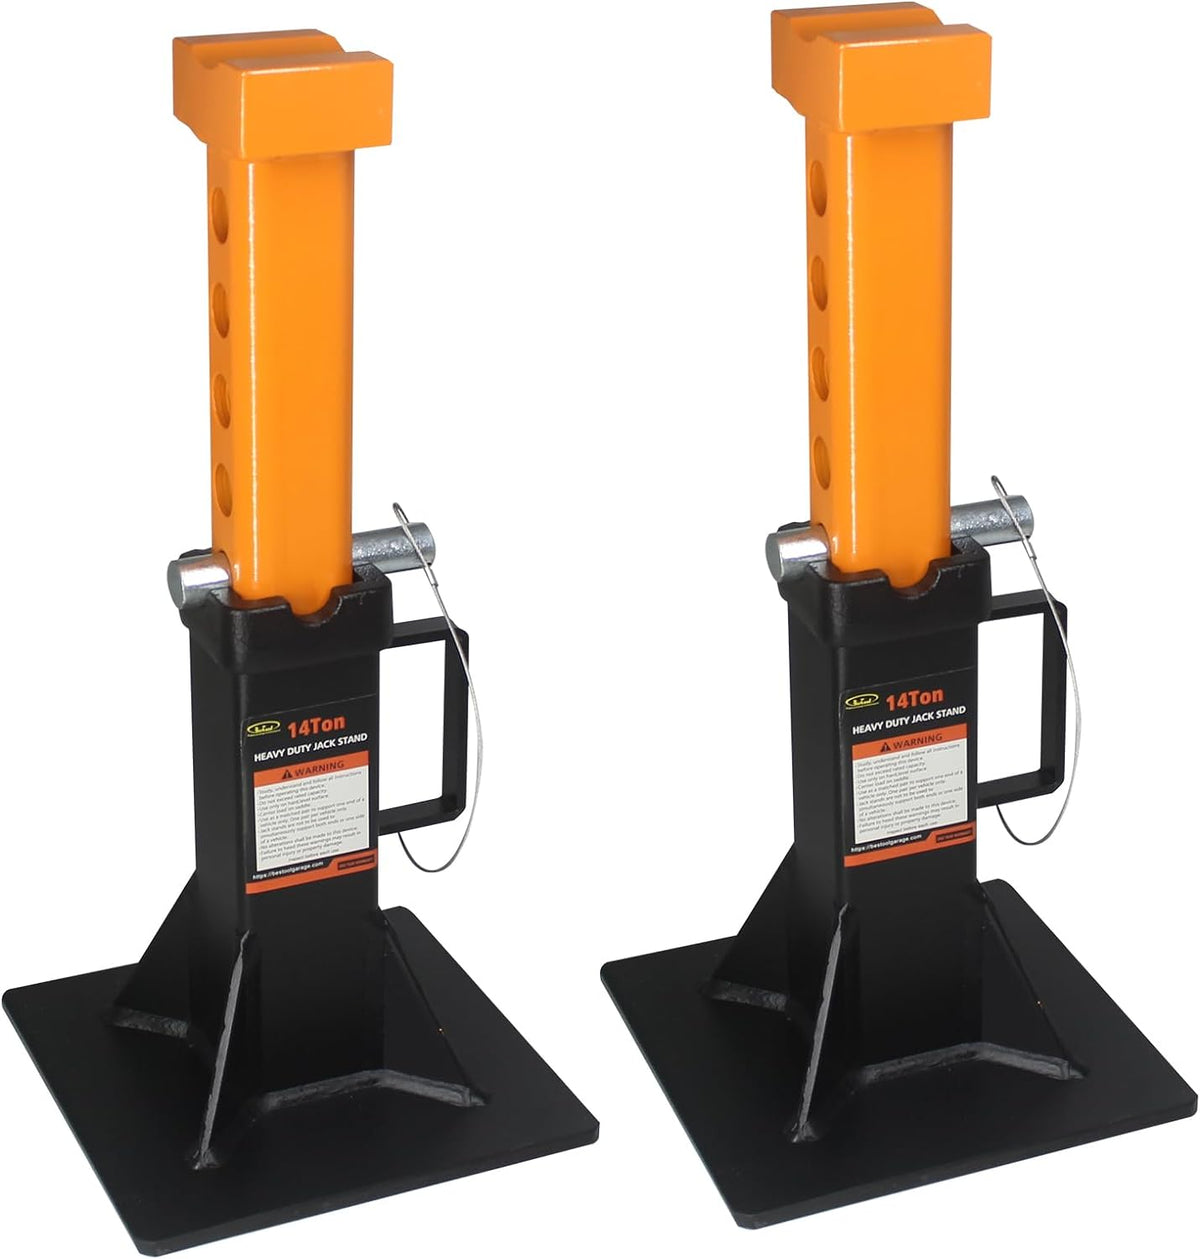 BESTOOL Heavy Duty Jack Stand | Truck Jack Stand with Security Locking Pins-14 ton(28000Ibs) Capacity, 2 Pack